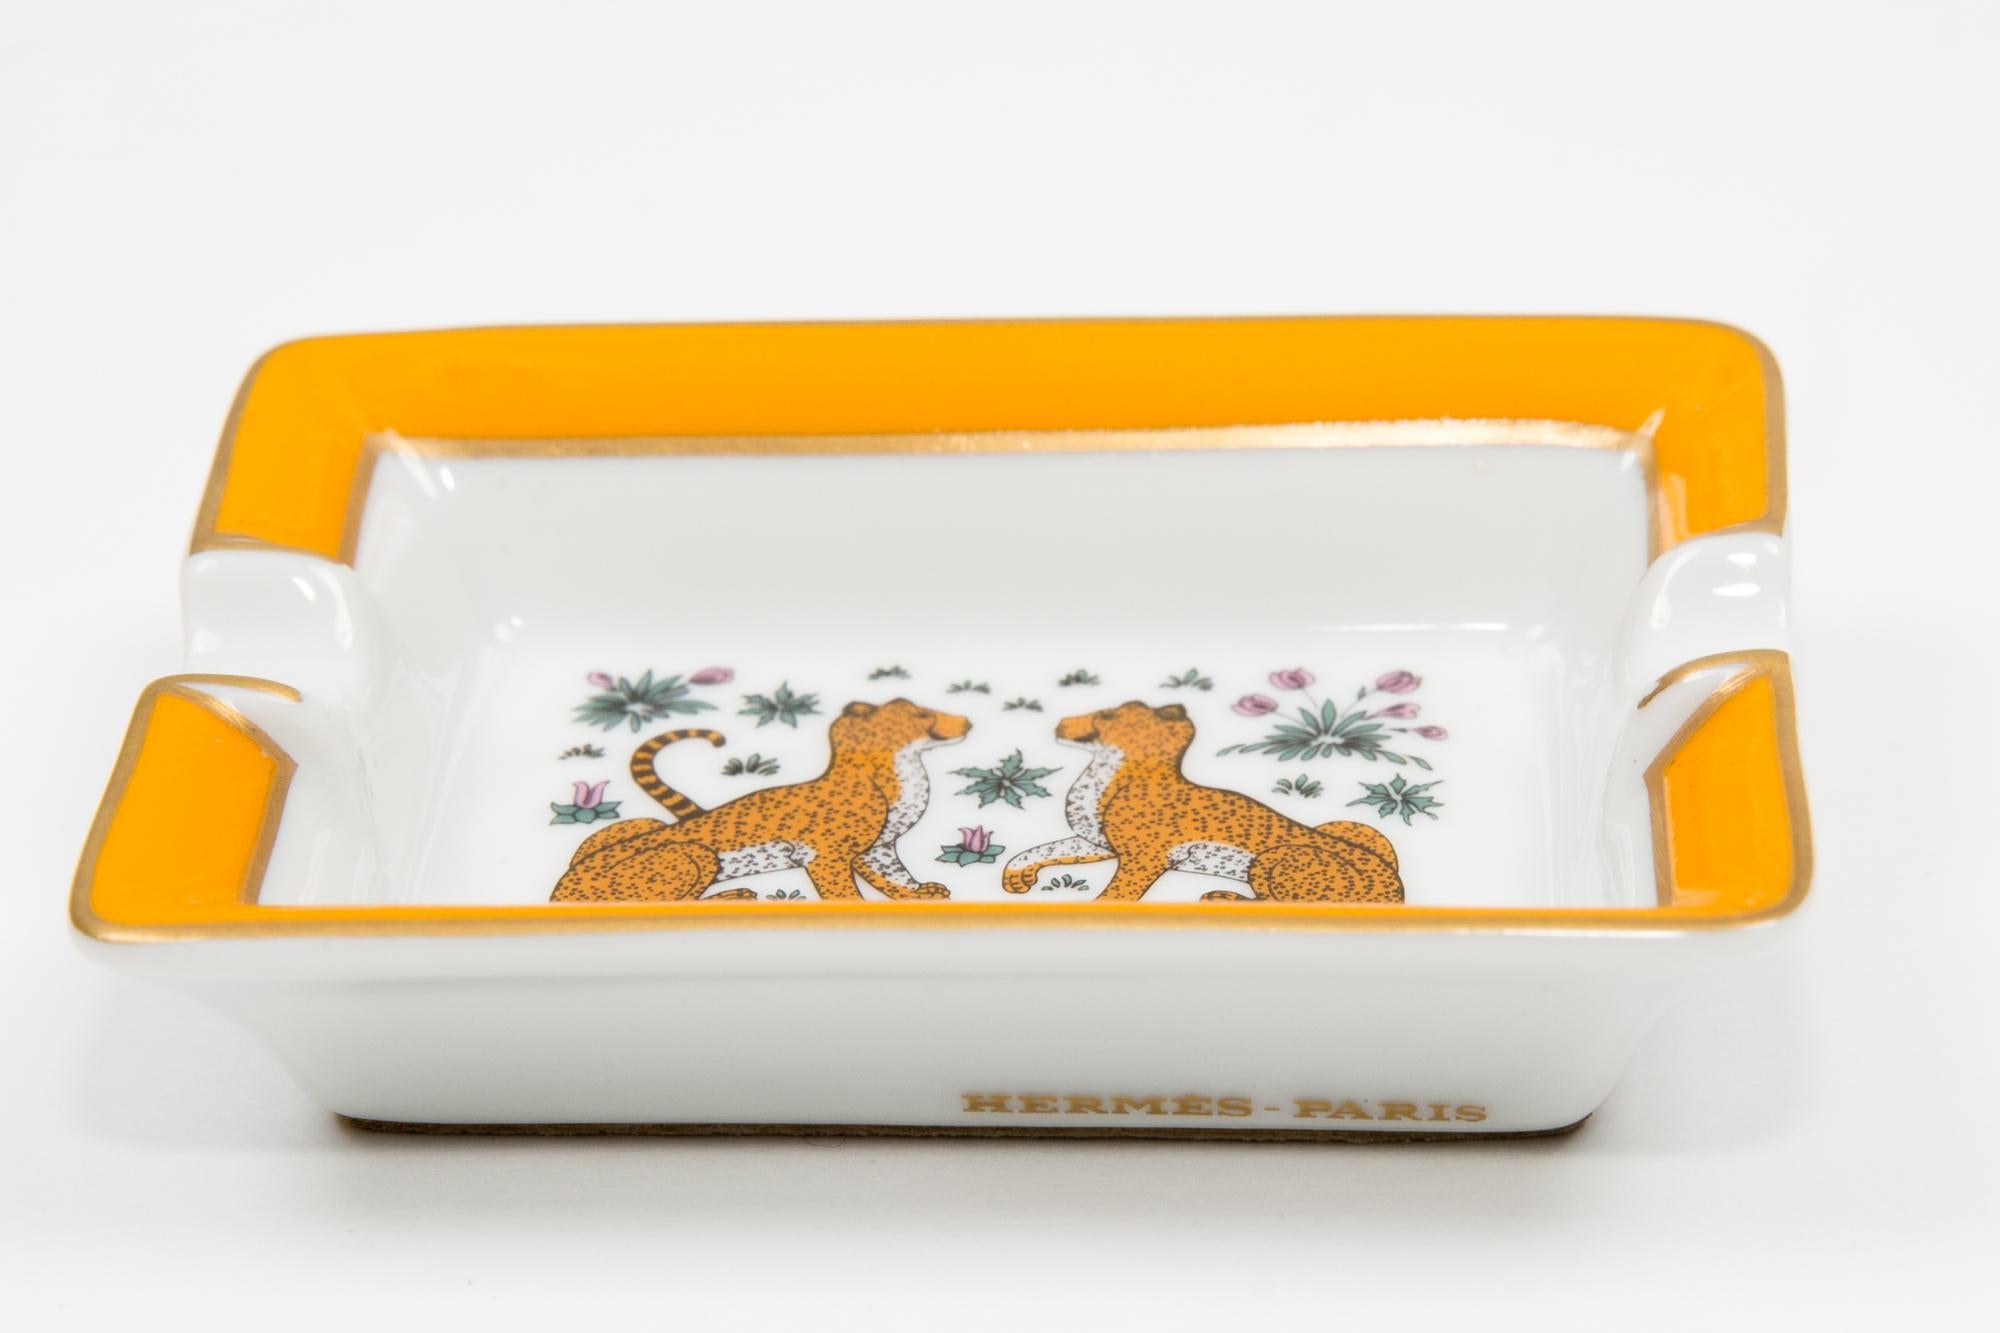 Hermes Leopard Porcelain Ashtray or Organizer In Good Condition For Sale In Paris, FR